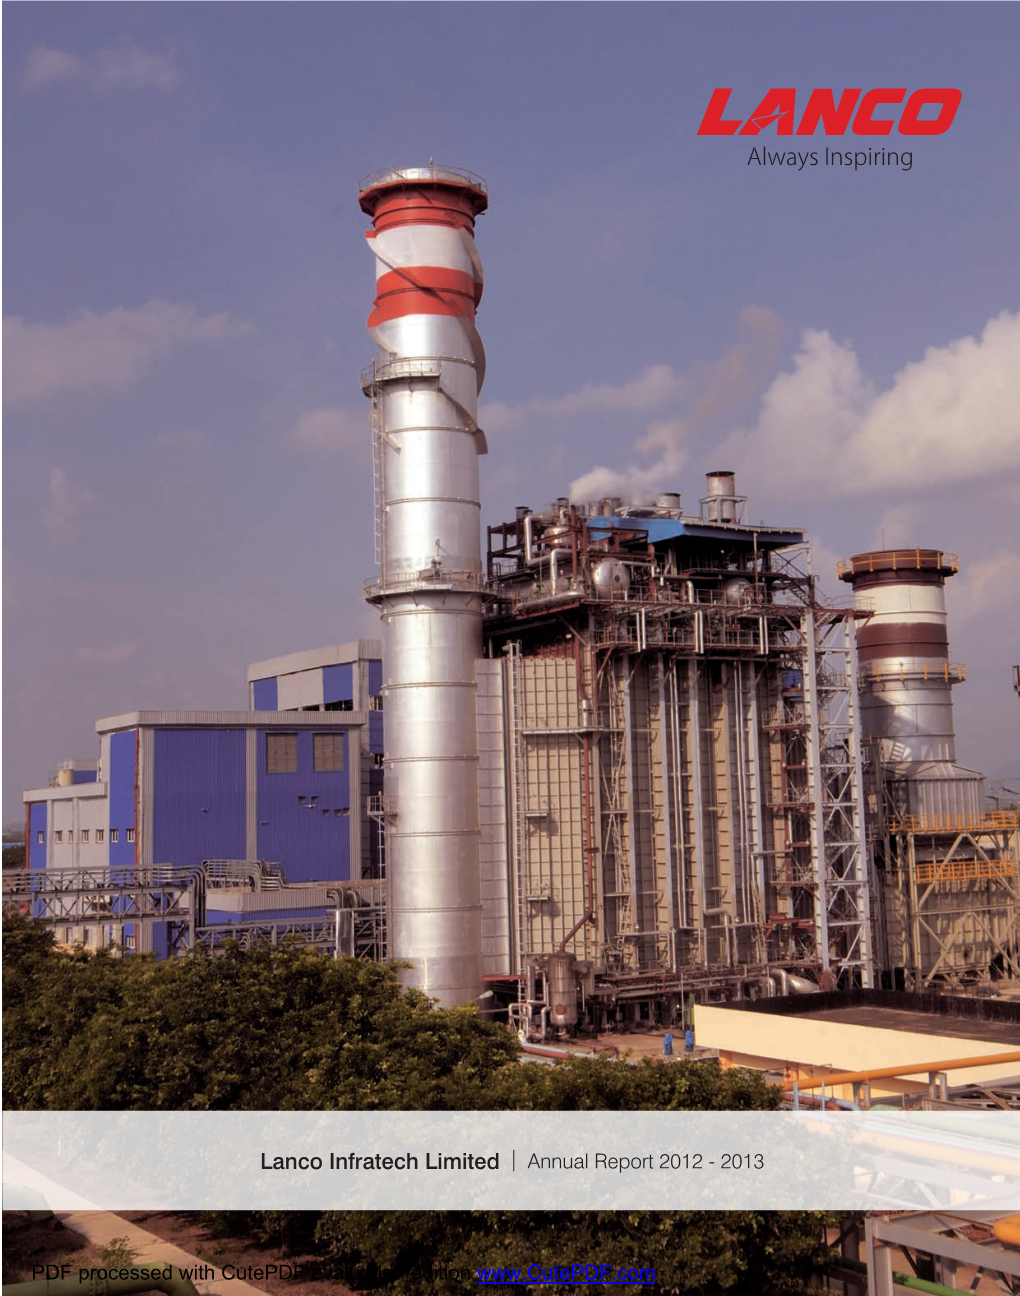 Lanco Infratech Limited Annual Report 2012 - 2013